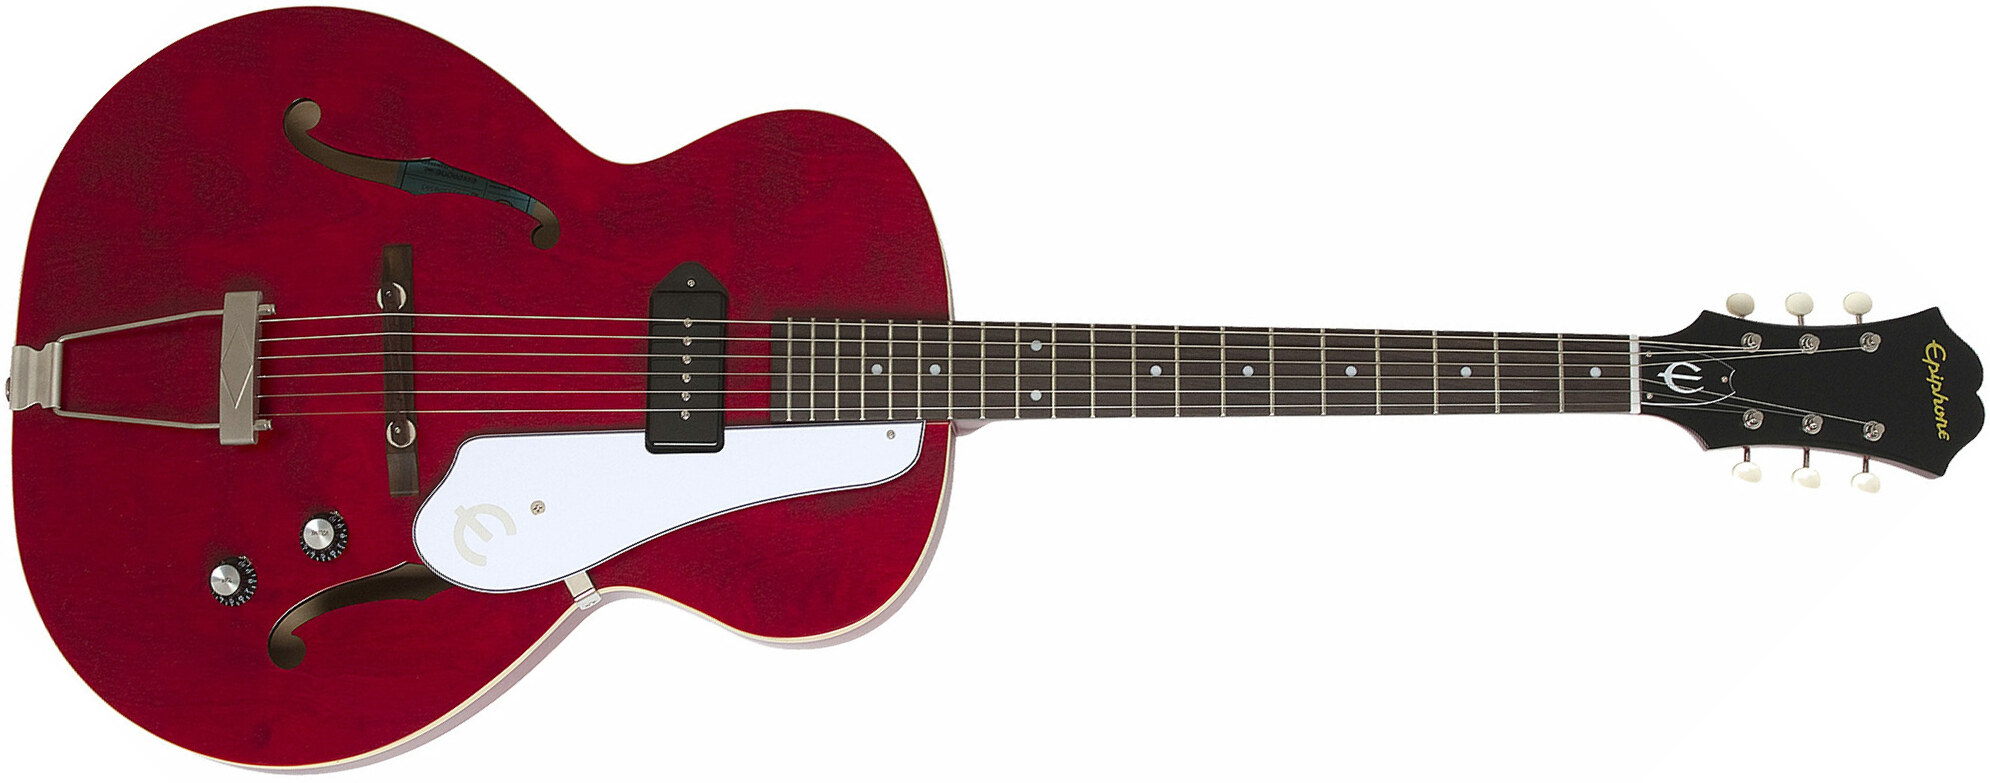 Epiphone Inspired By 1966 Century 2016 - Aged Gloss Cherry - Guitarra eléctrica semi caja - Main picture